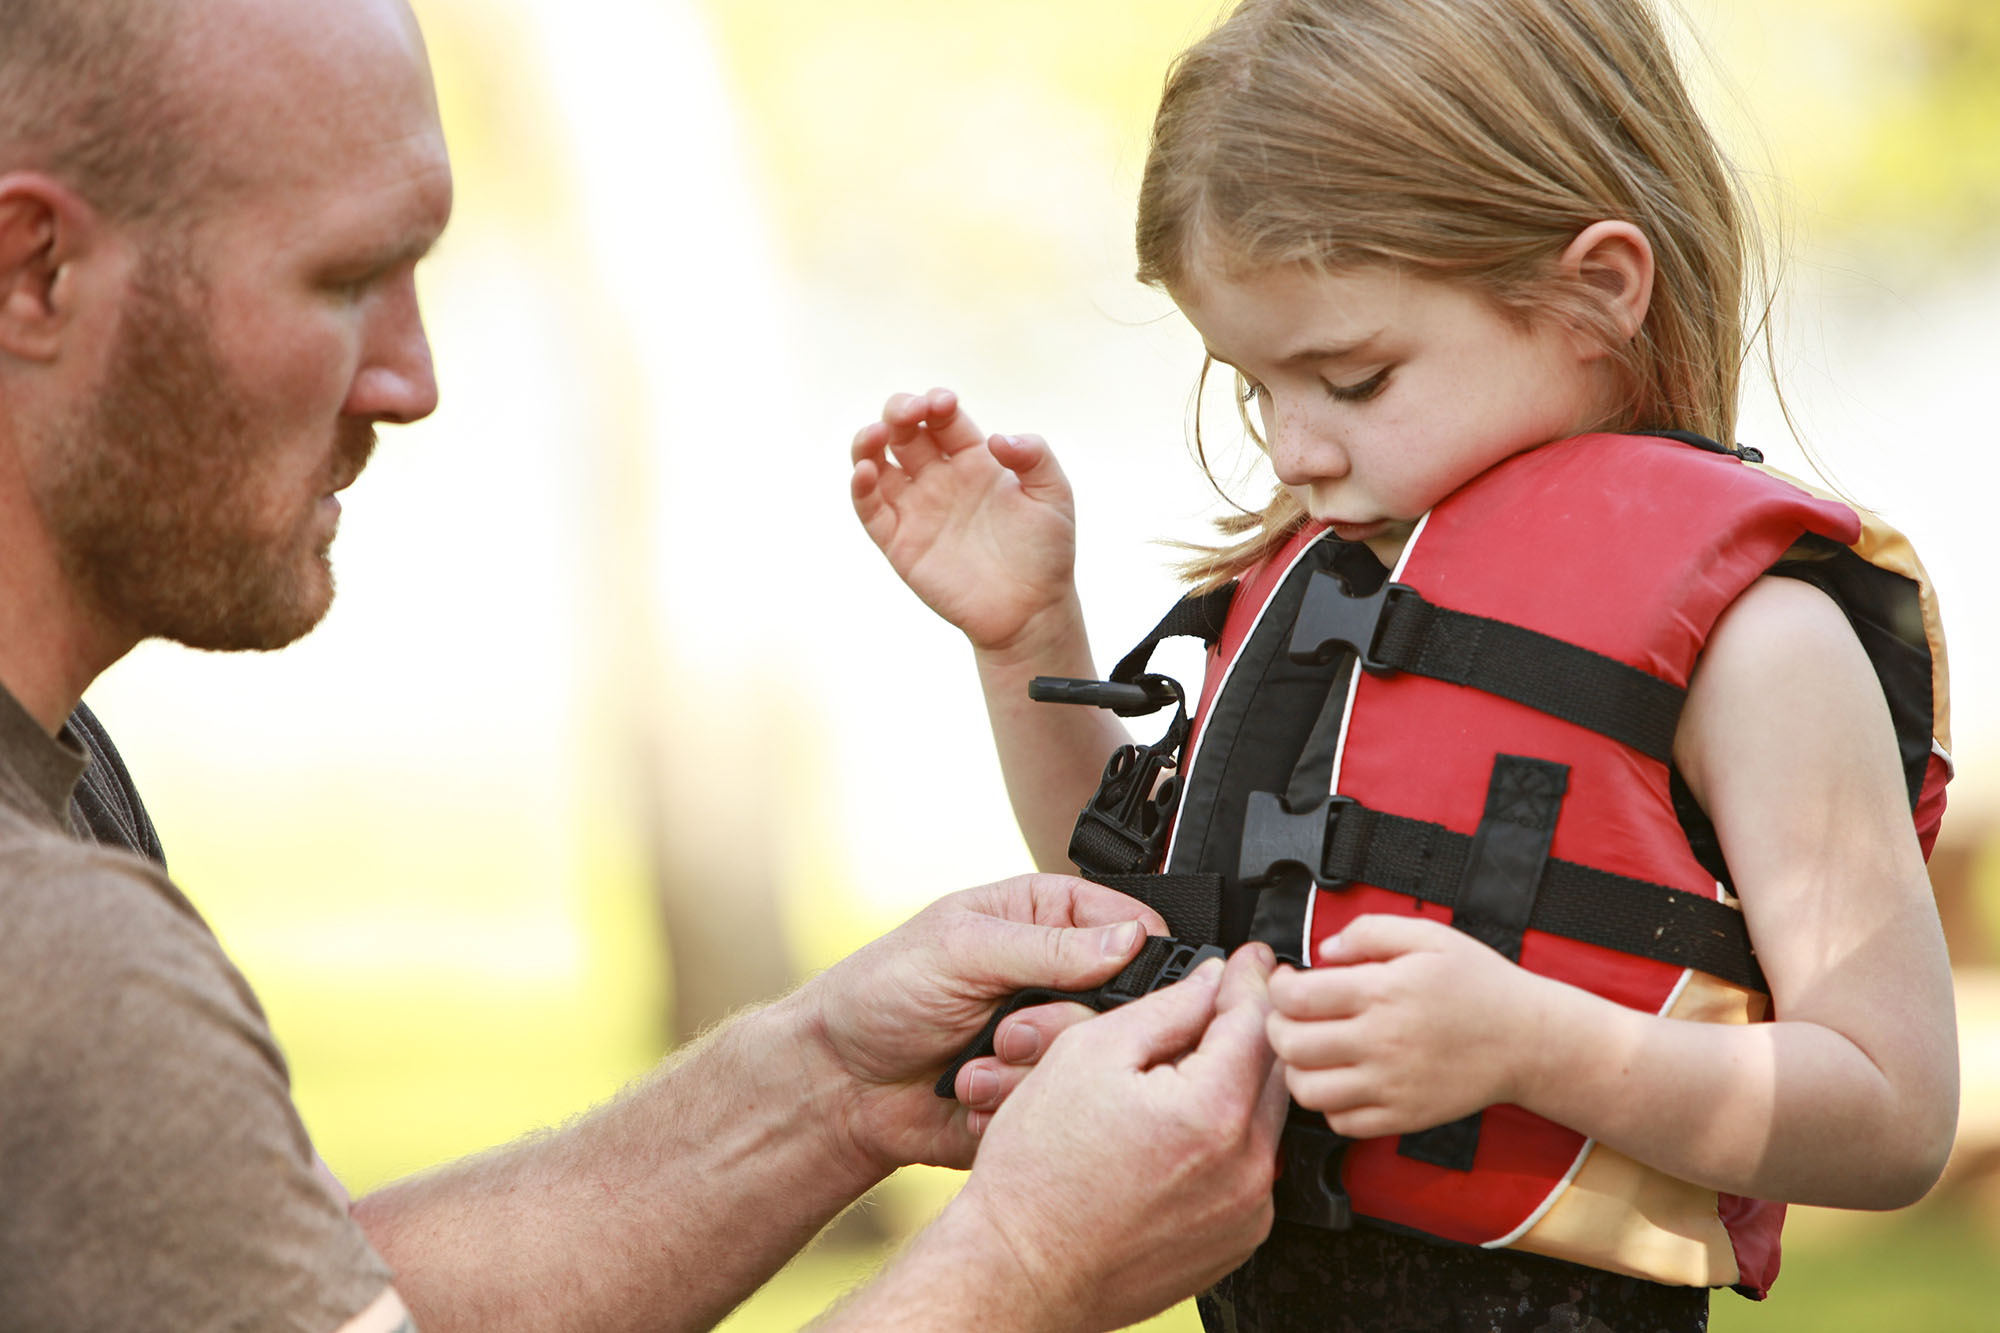 Featured image for “How to Choose a Life Vest”